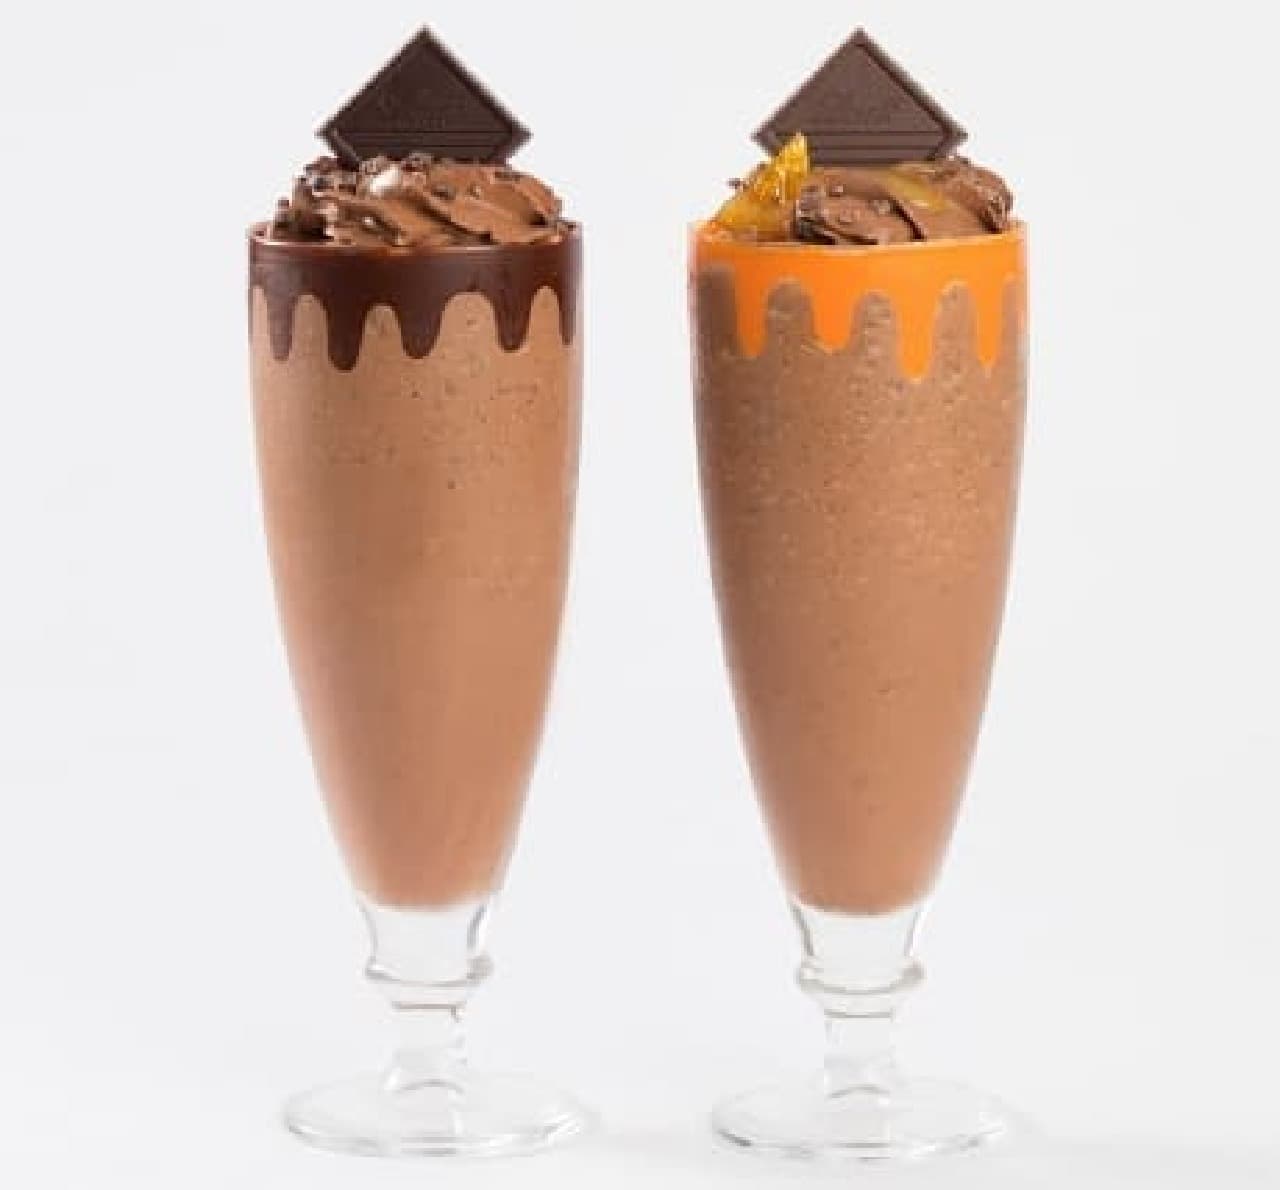 "Lindt Excellence 70% Dark Chocolate Drink" and "Lindt Excellence Orange Dark Chocolate Drink"